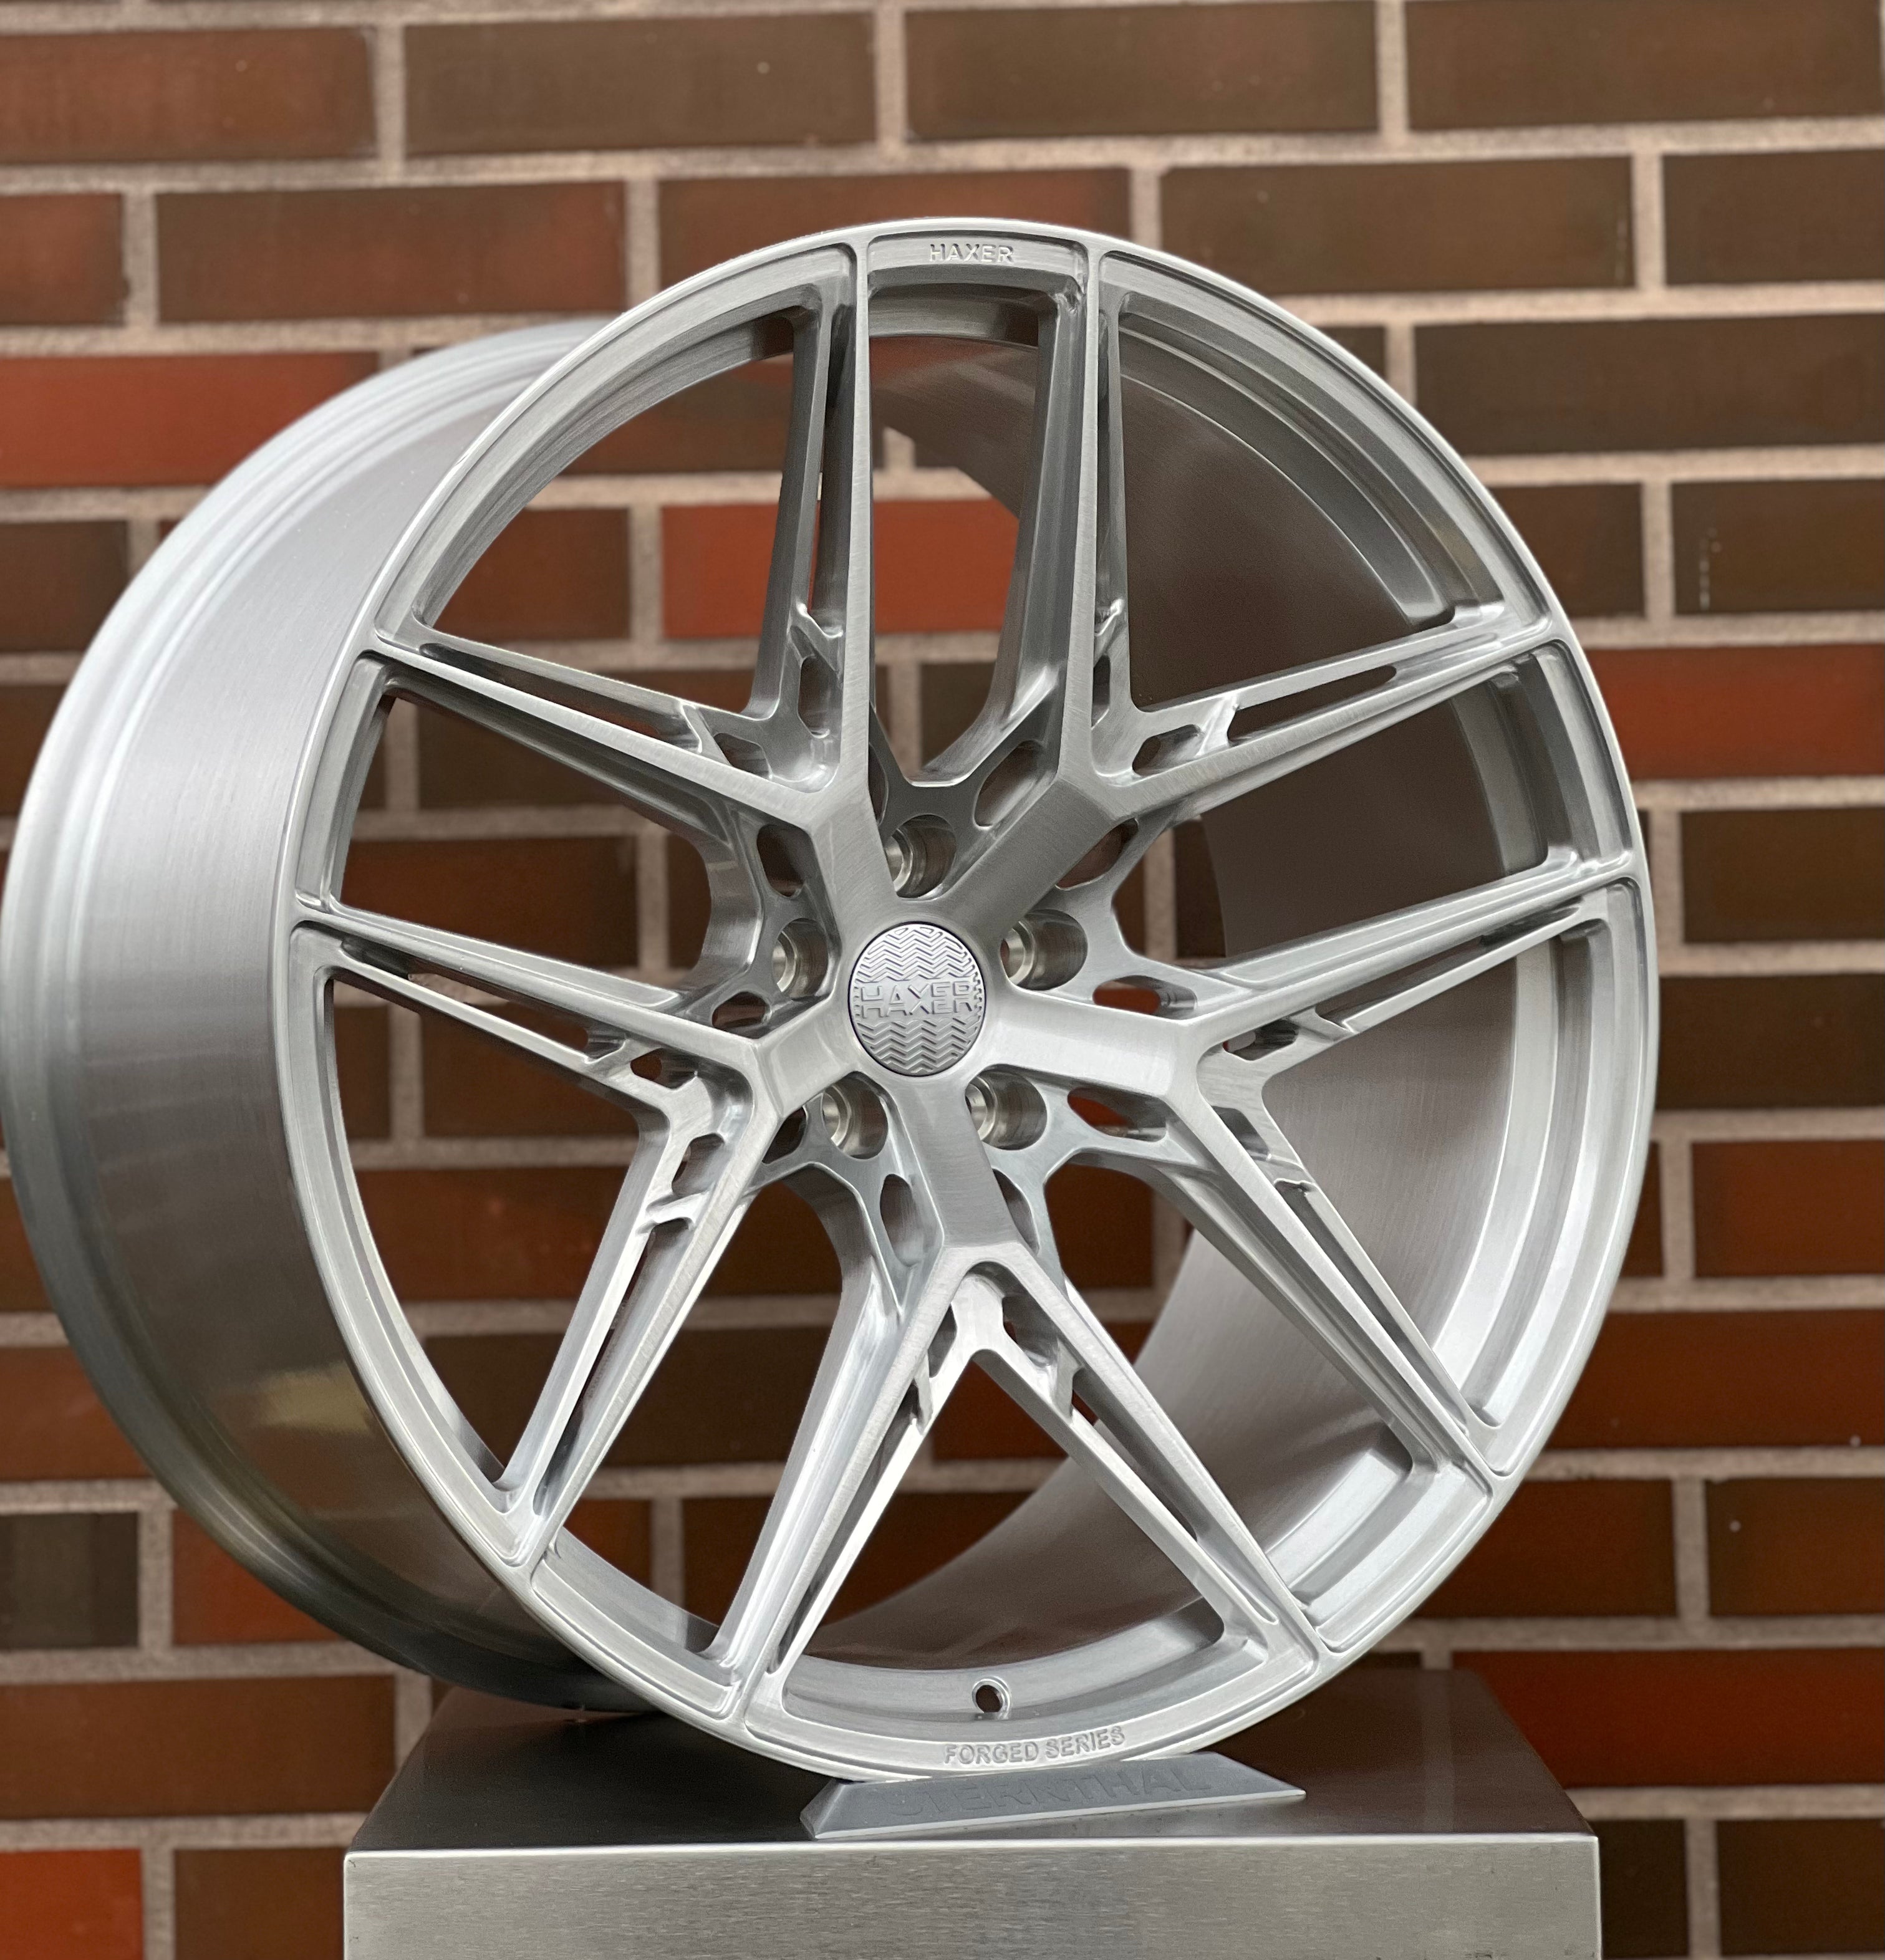 HAXER Forged HXF-01 Silver Brushed